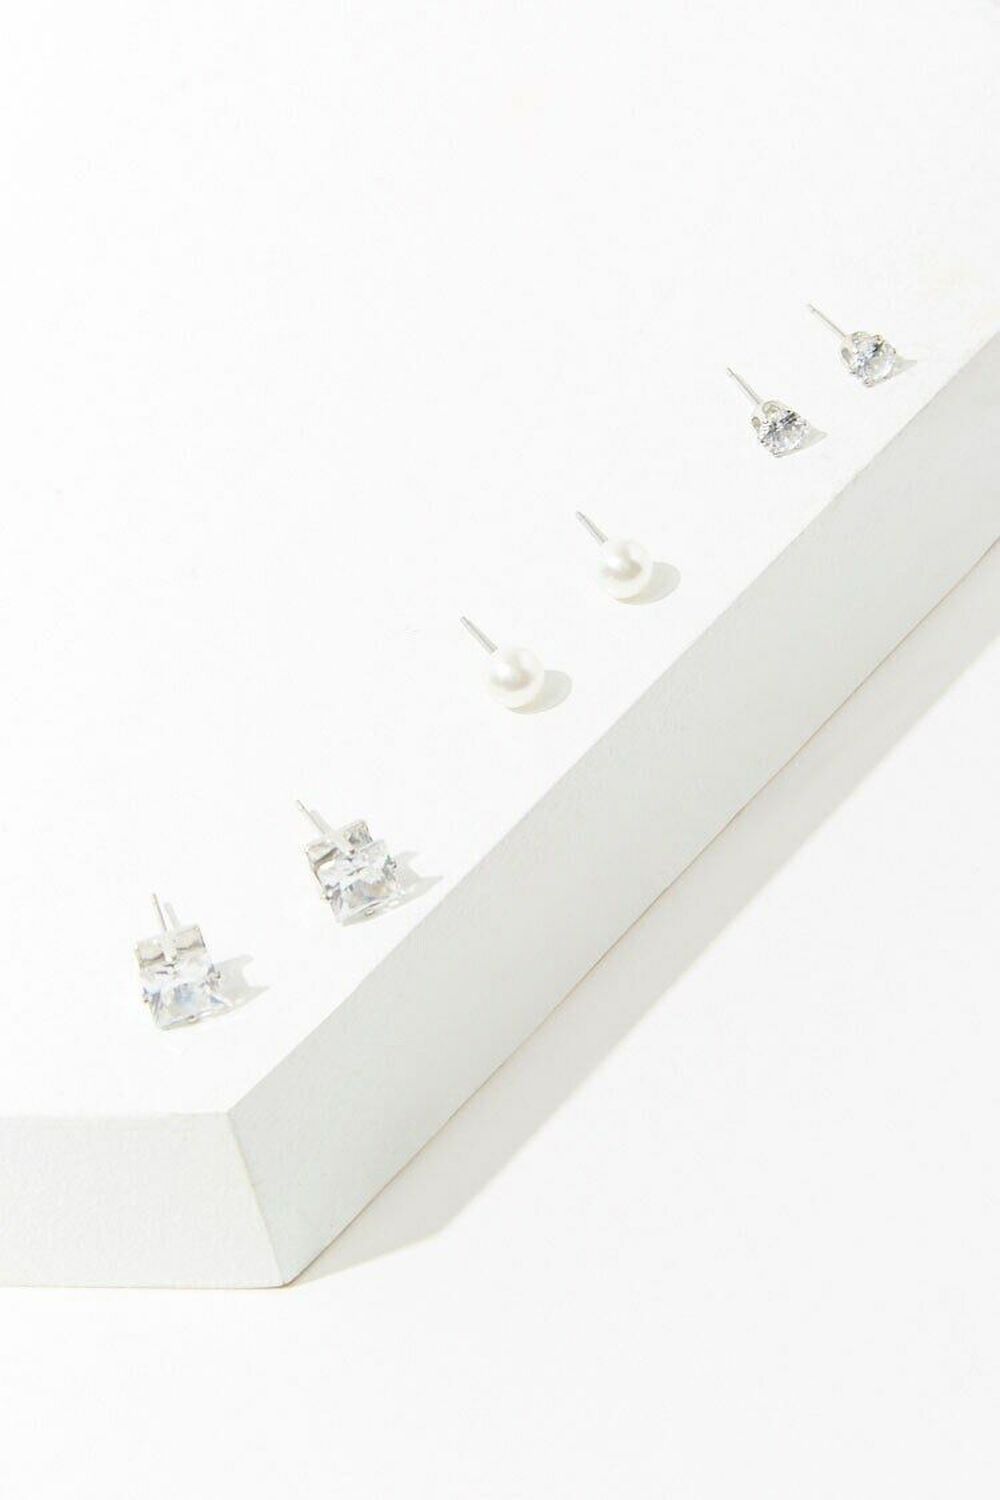 SILVER/CLEAR CZ Stone Stud Earring Set, image 1